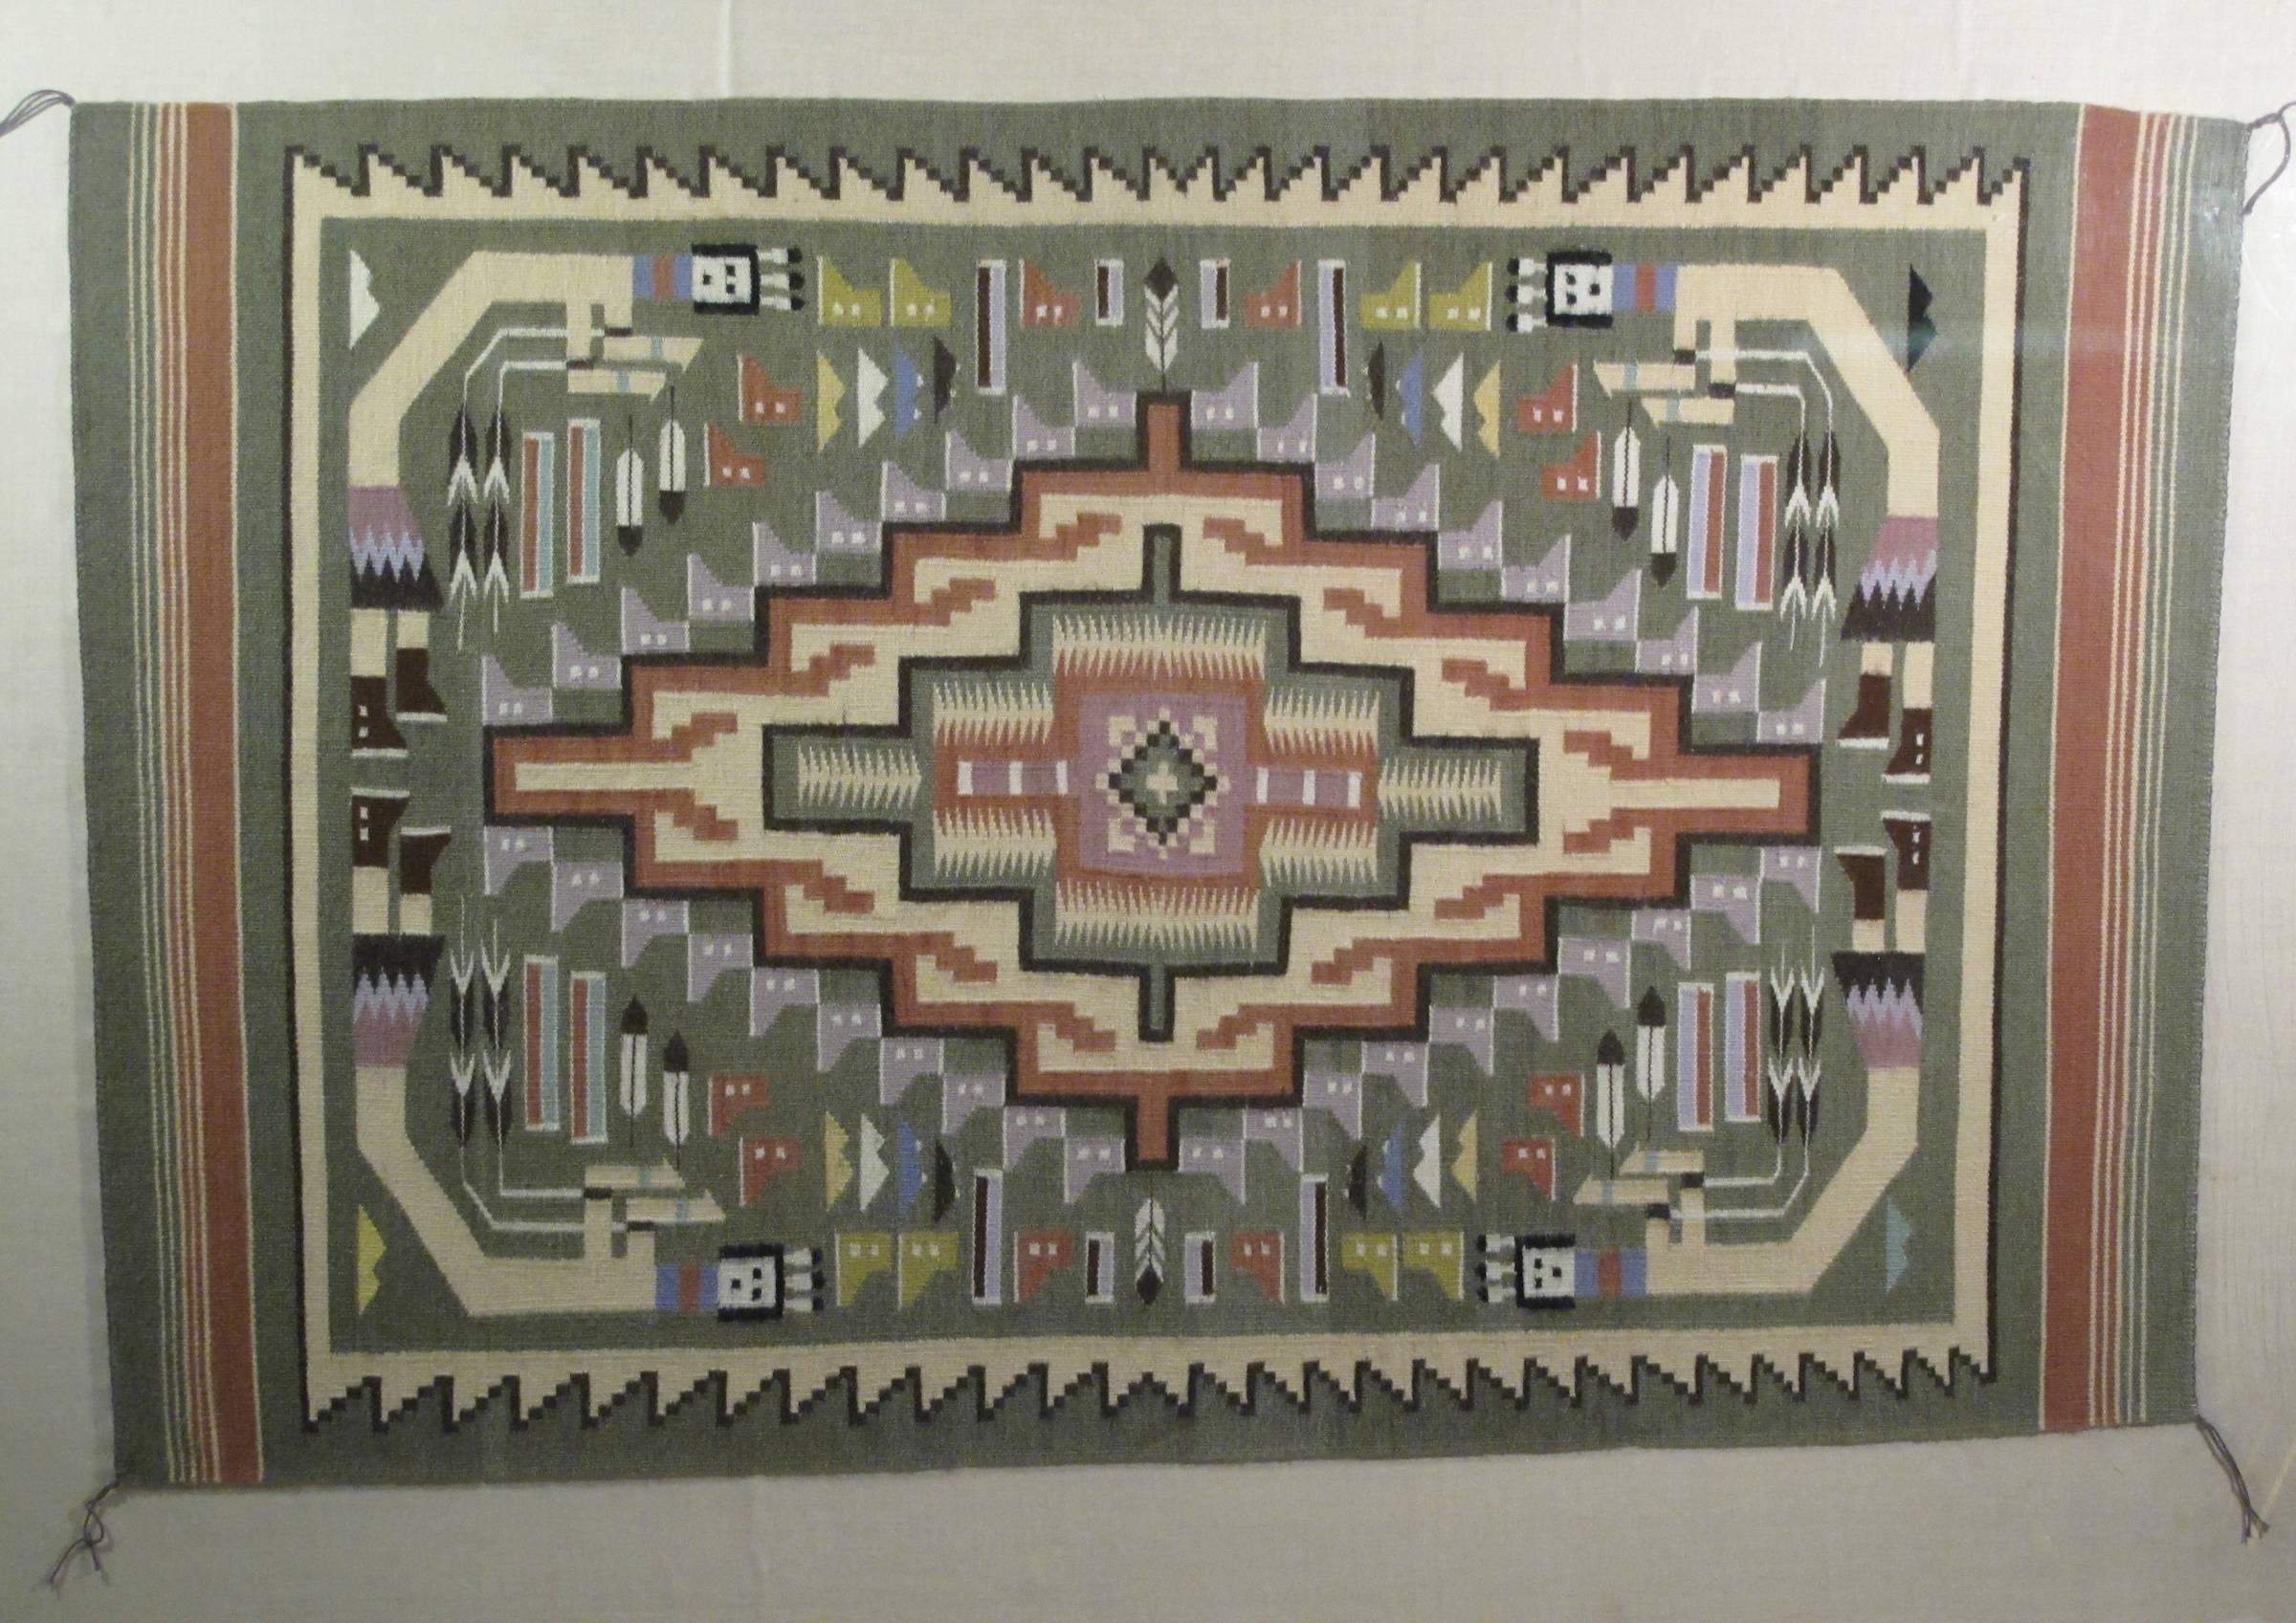 Shoe Game, Wool Navajo rug, coral, green, blue &amp; ivory weave - Mixed Media Art by Victoria Keoni